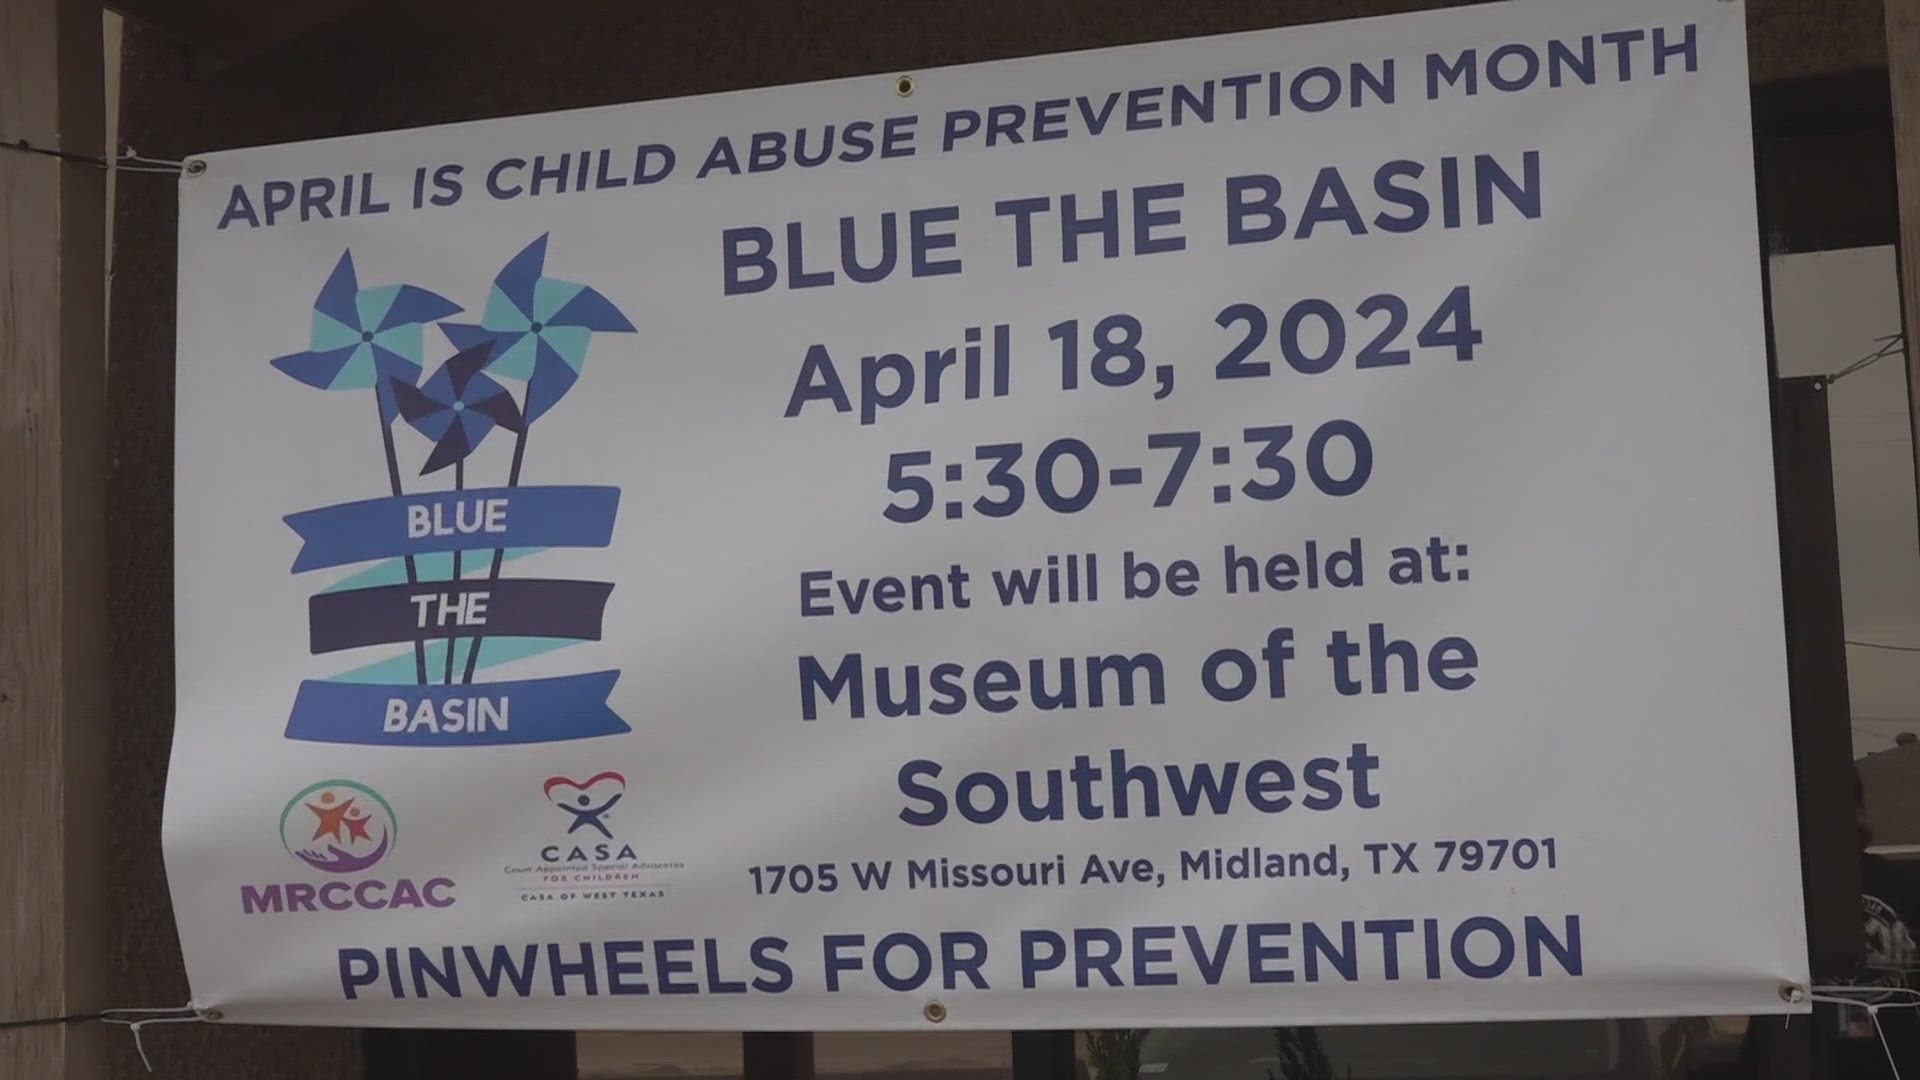 IT'S NOT EASY TO TALK WITH OUR CHILDREN ABOUT ABUSE. BUT THE CHILDREN'S ADVOCACY CENTER AND MIDLAND RAPE CRISIS CENTER SAY IT'S A CONVERSATION...YOU NEED TO HAVE.